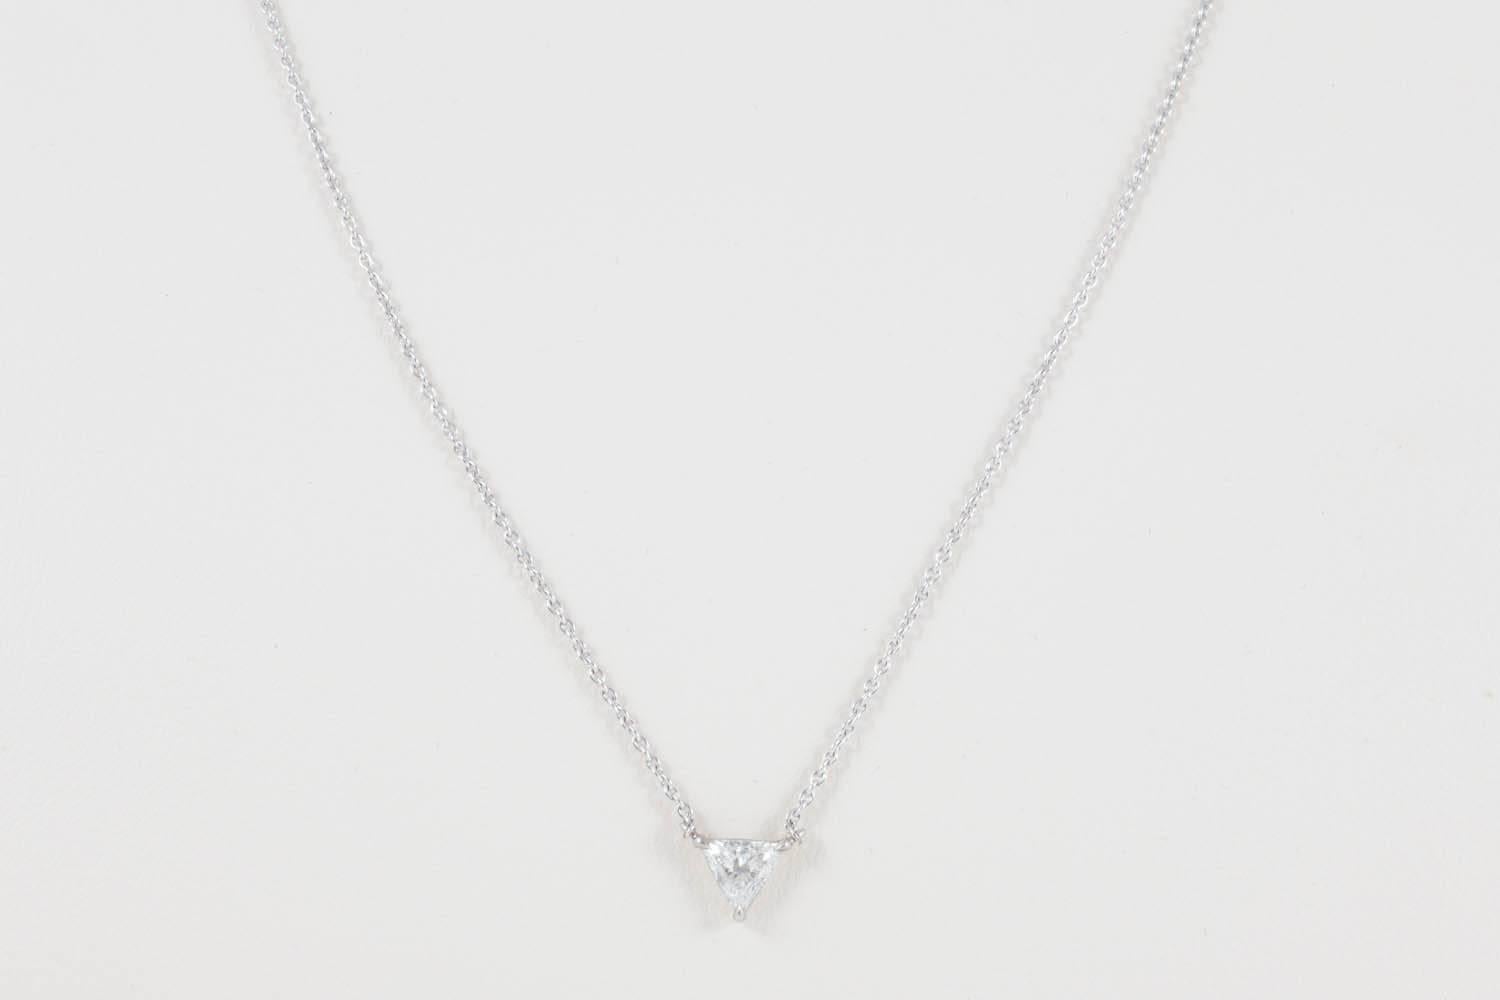 The trilliant cut diamond weighs approximately a third of a carat and is of H colour and VS2 clarity - it is beautifully mounted in 18ct white gold with a fine trace chain and high quality clasp. 